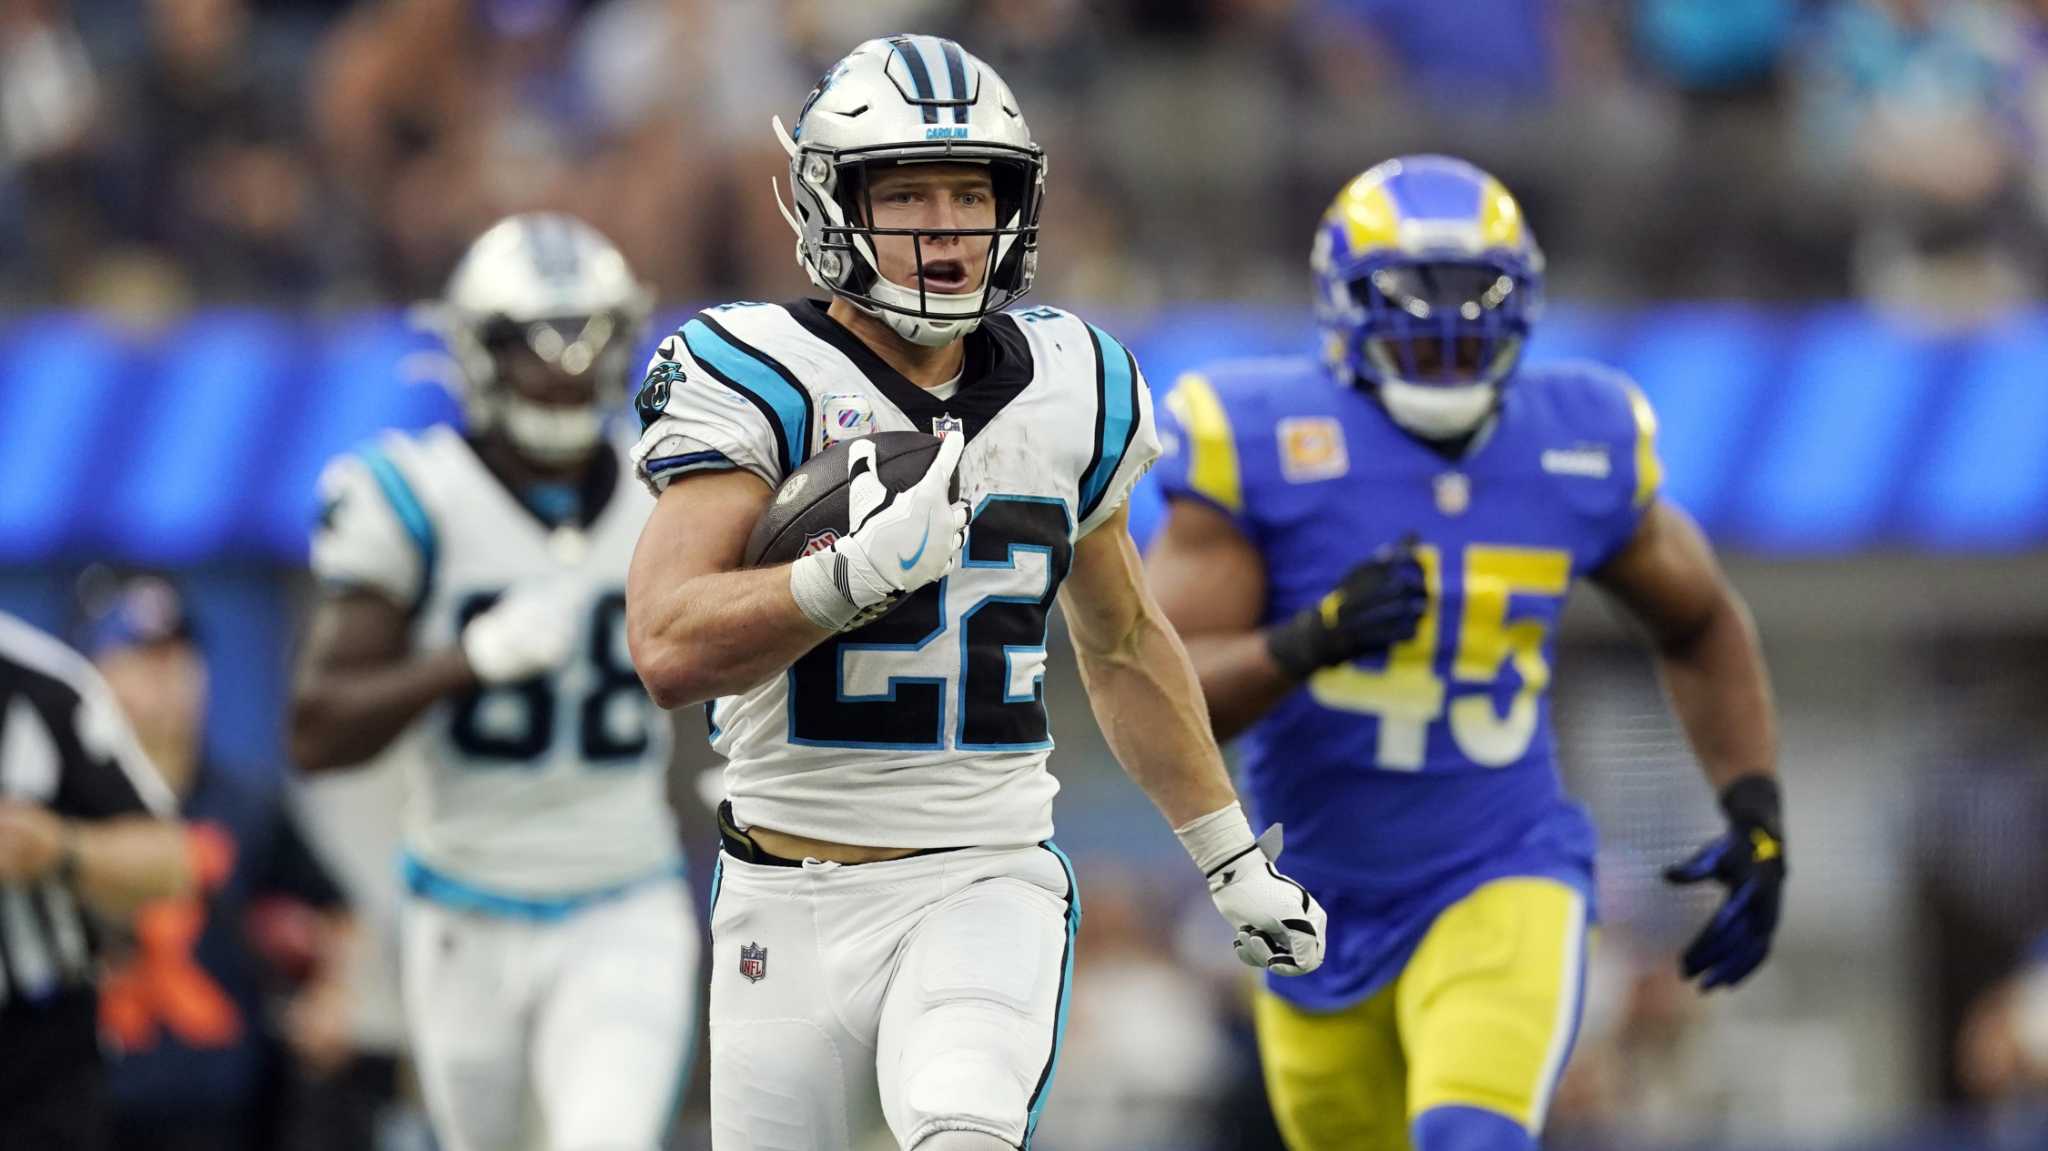 Christian McCaffrey and Deebo Samuel power the 49ers over the Rams